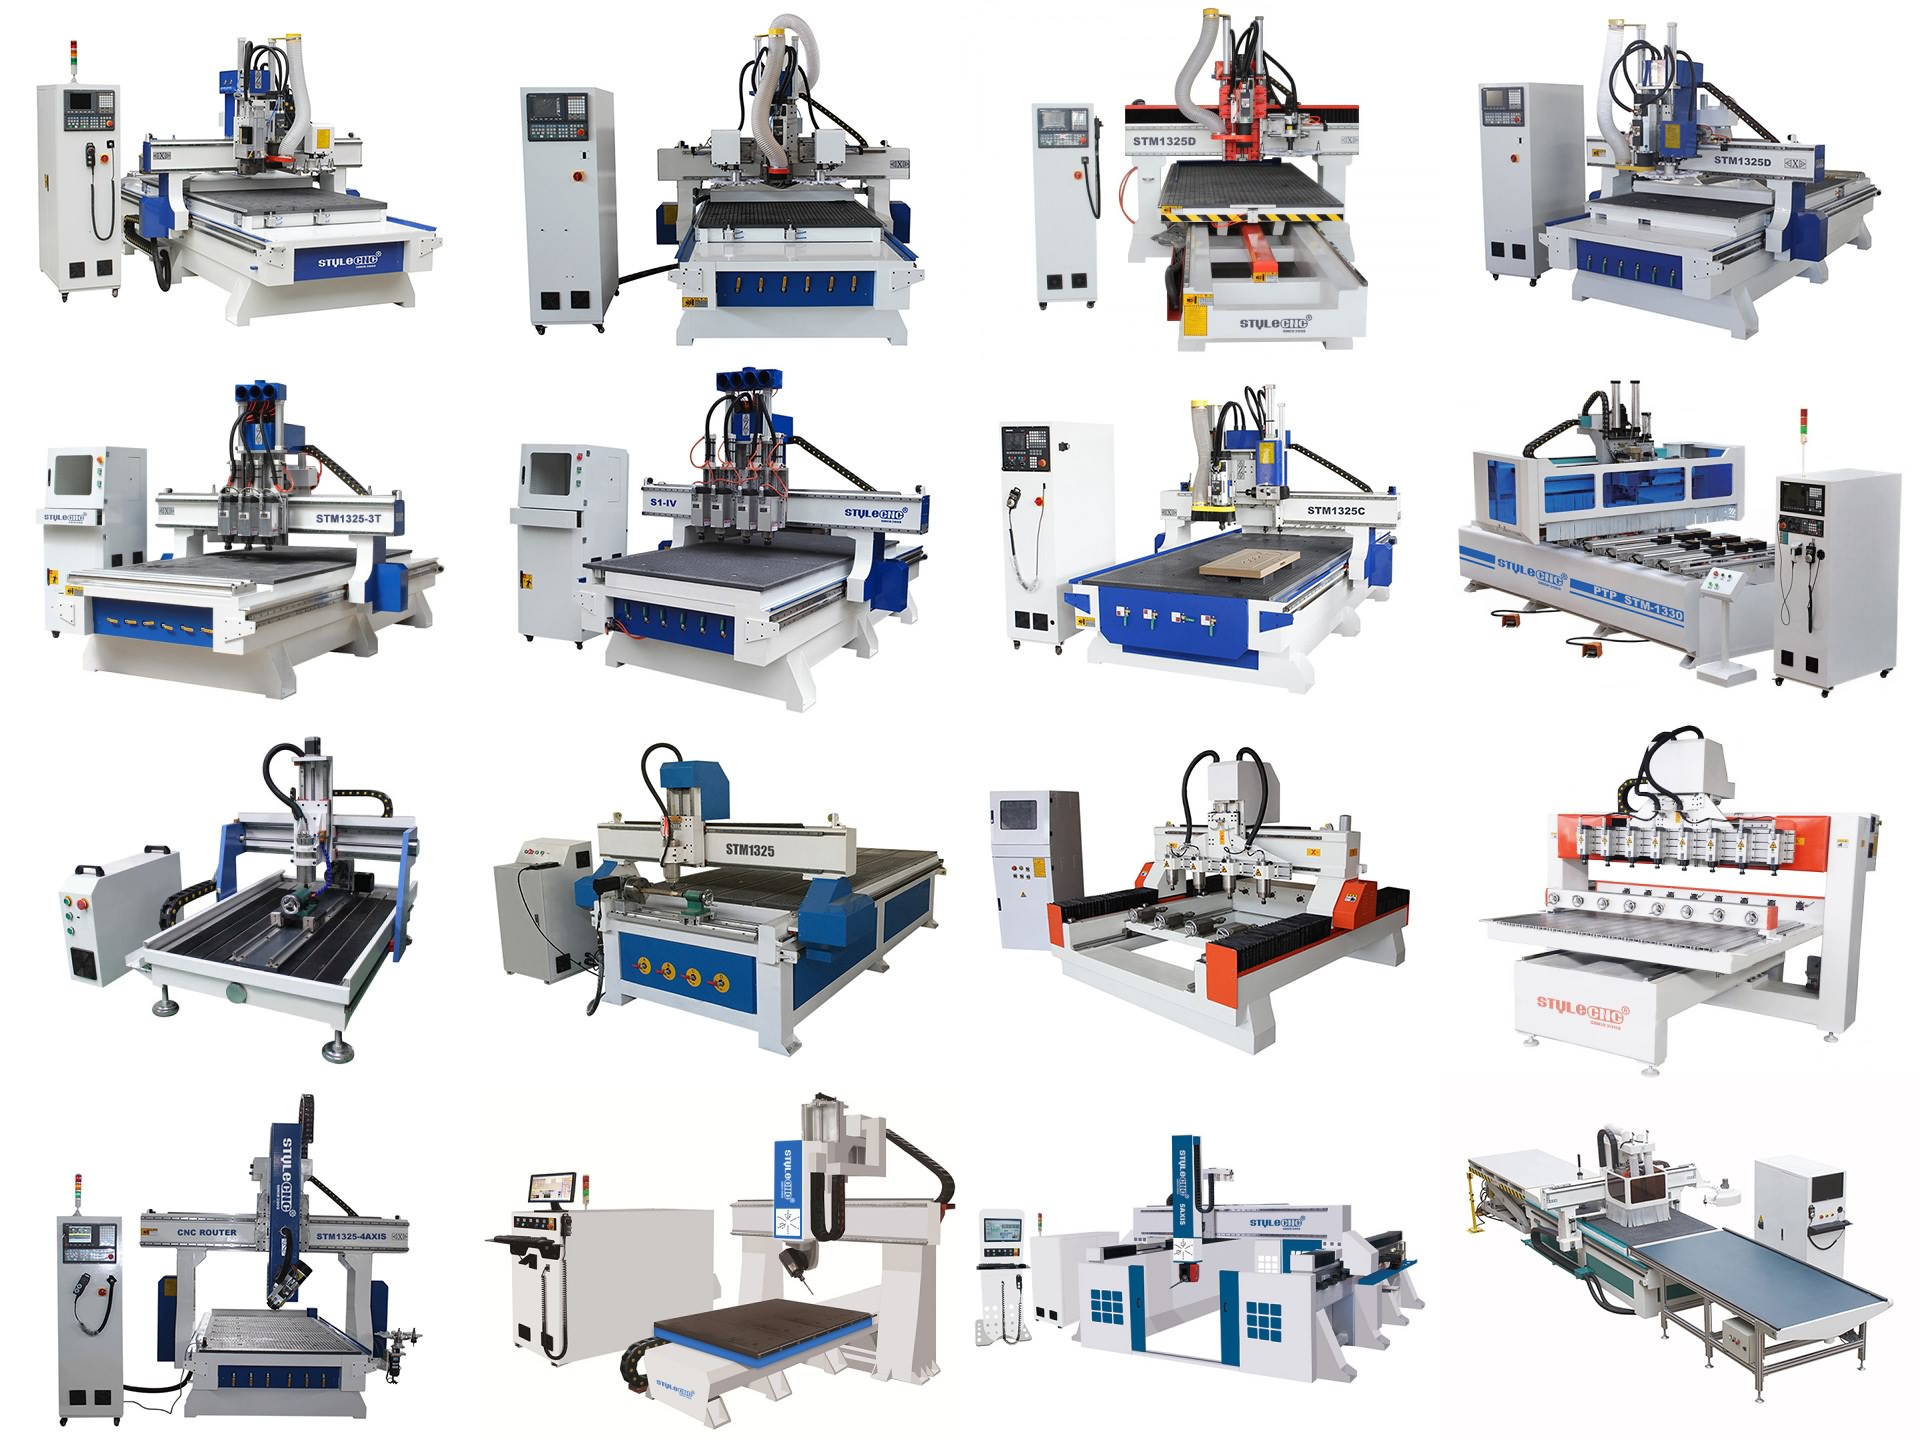 2021 Top Reviewed CNC Machines for Woodworking